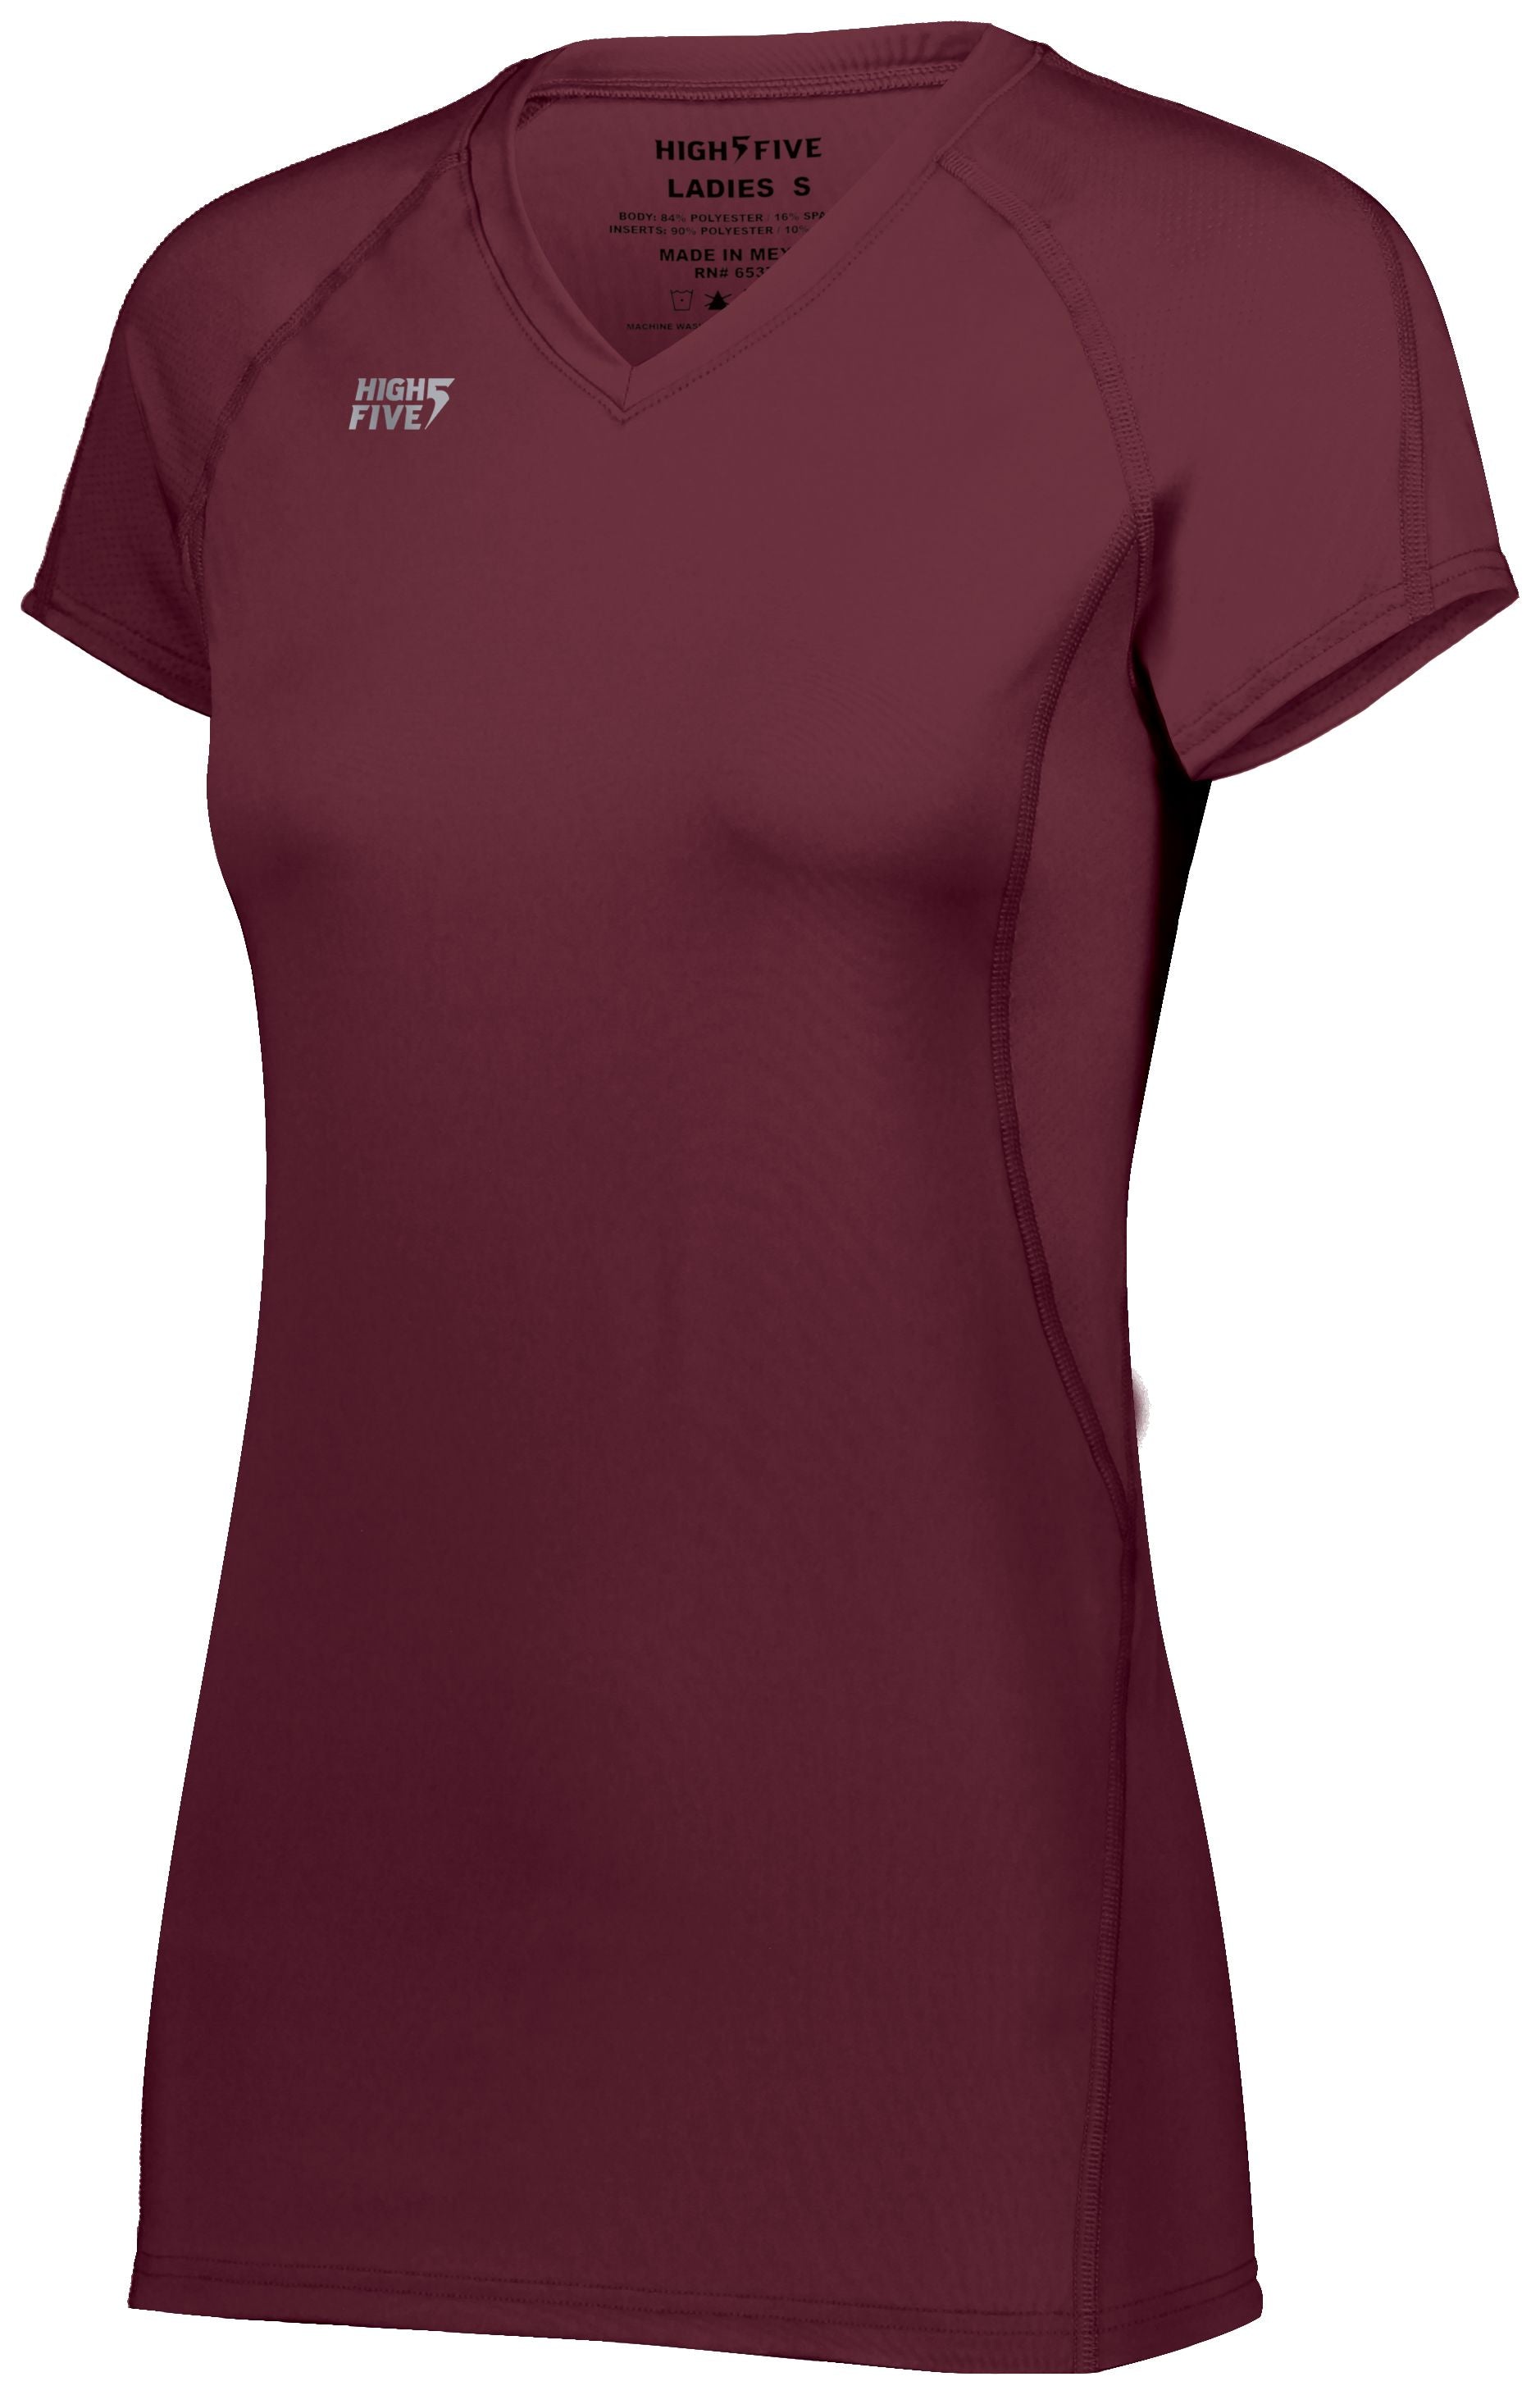 High 5 Girls Truhit Short Sleeve Jersey in Maroon (Hlw)  -Part of the Girls, High5-Products, Volleyball, Girls-Jersey, Shirts product lines at KanaleyCreations.com